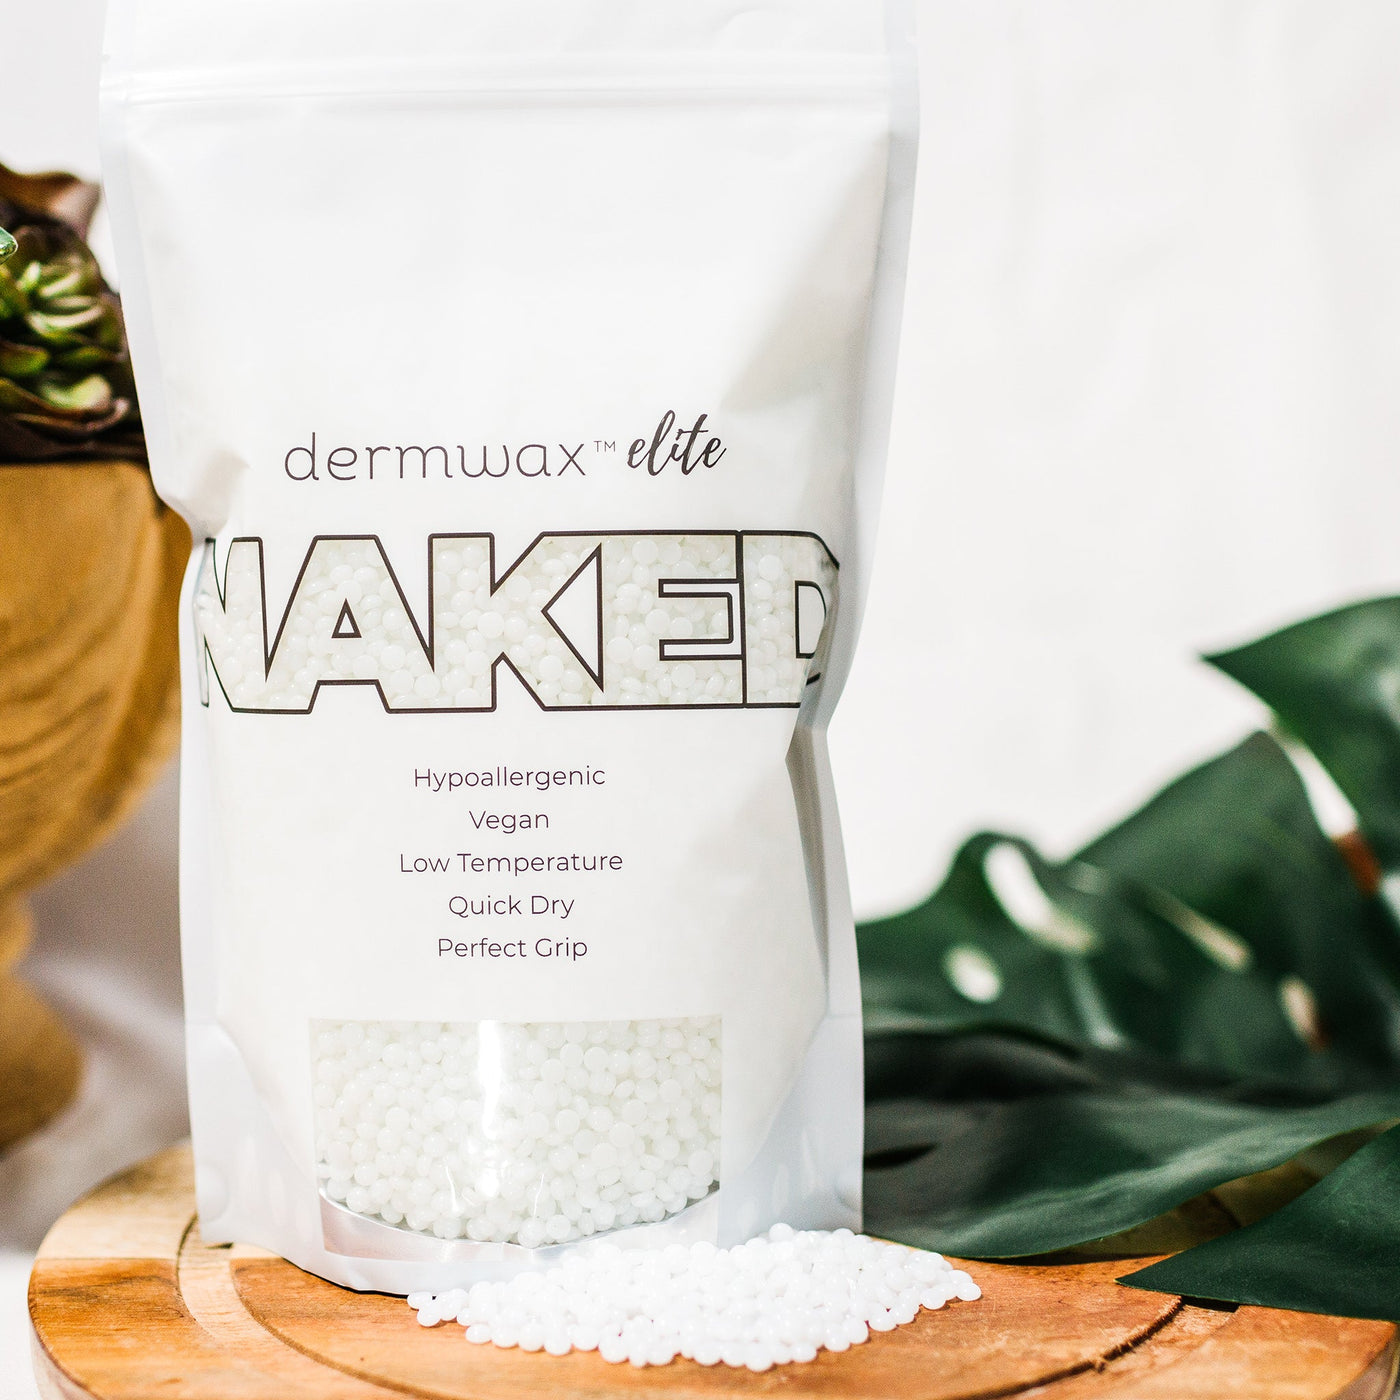 Dermwax Elite NAKED Clear Professional Hard Wax Beads - In a Spa